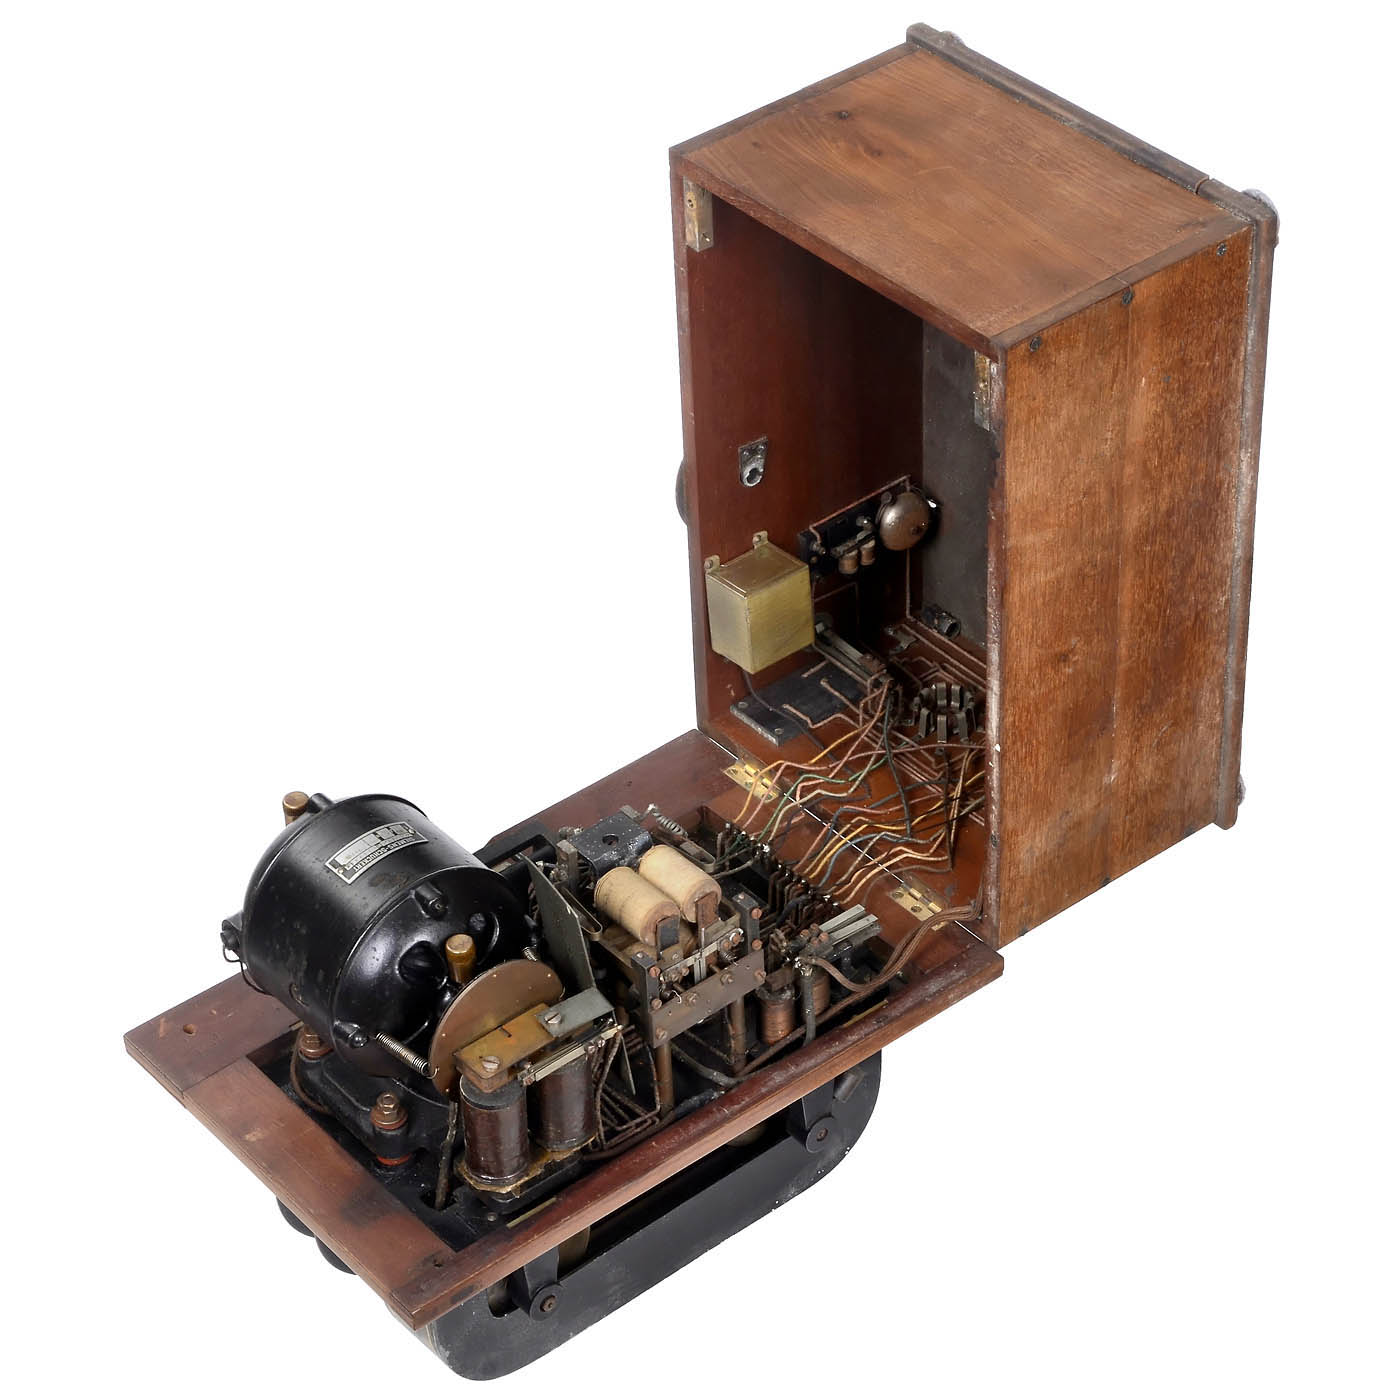 Telegraphone Magnetic Wire-Recording and Repeating Device, c. 1905 - Image 3 of 3